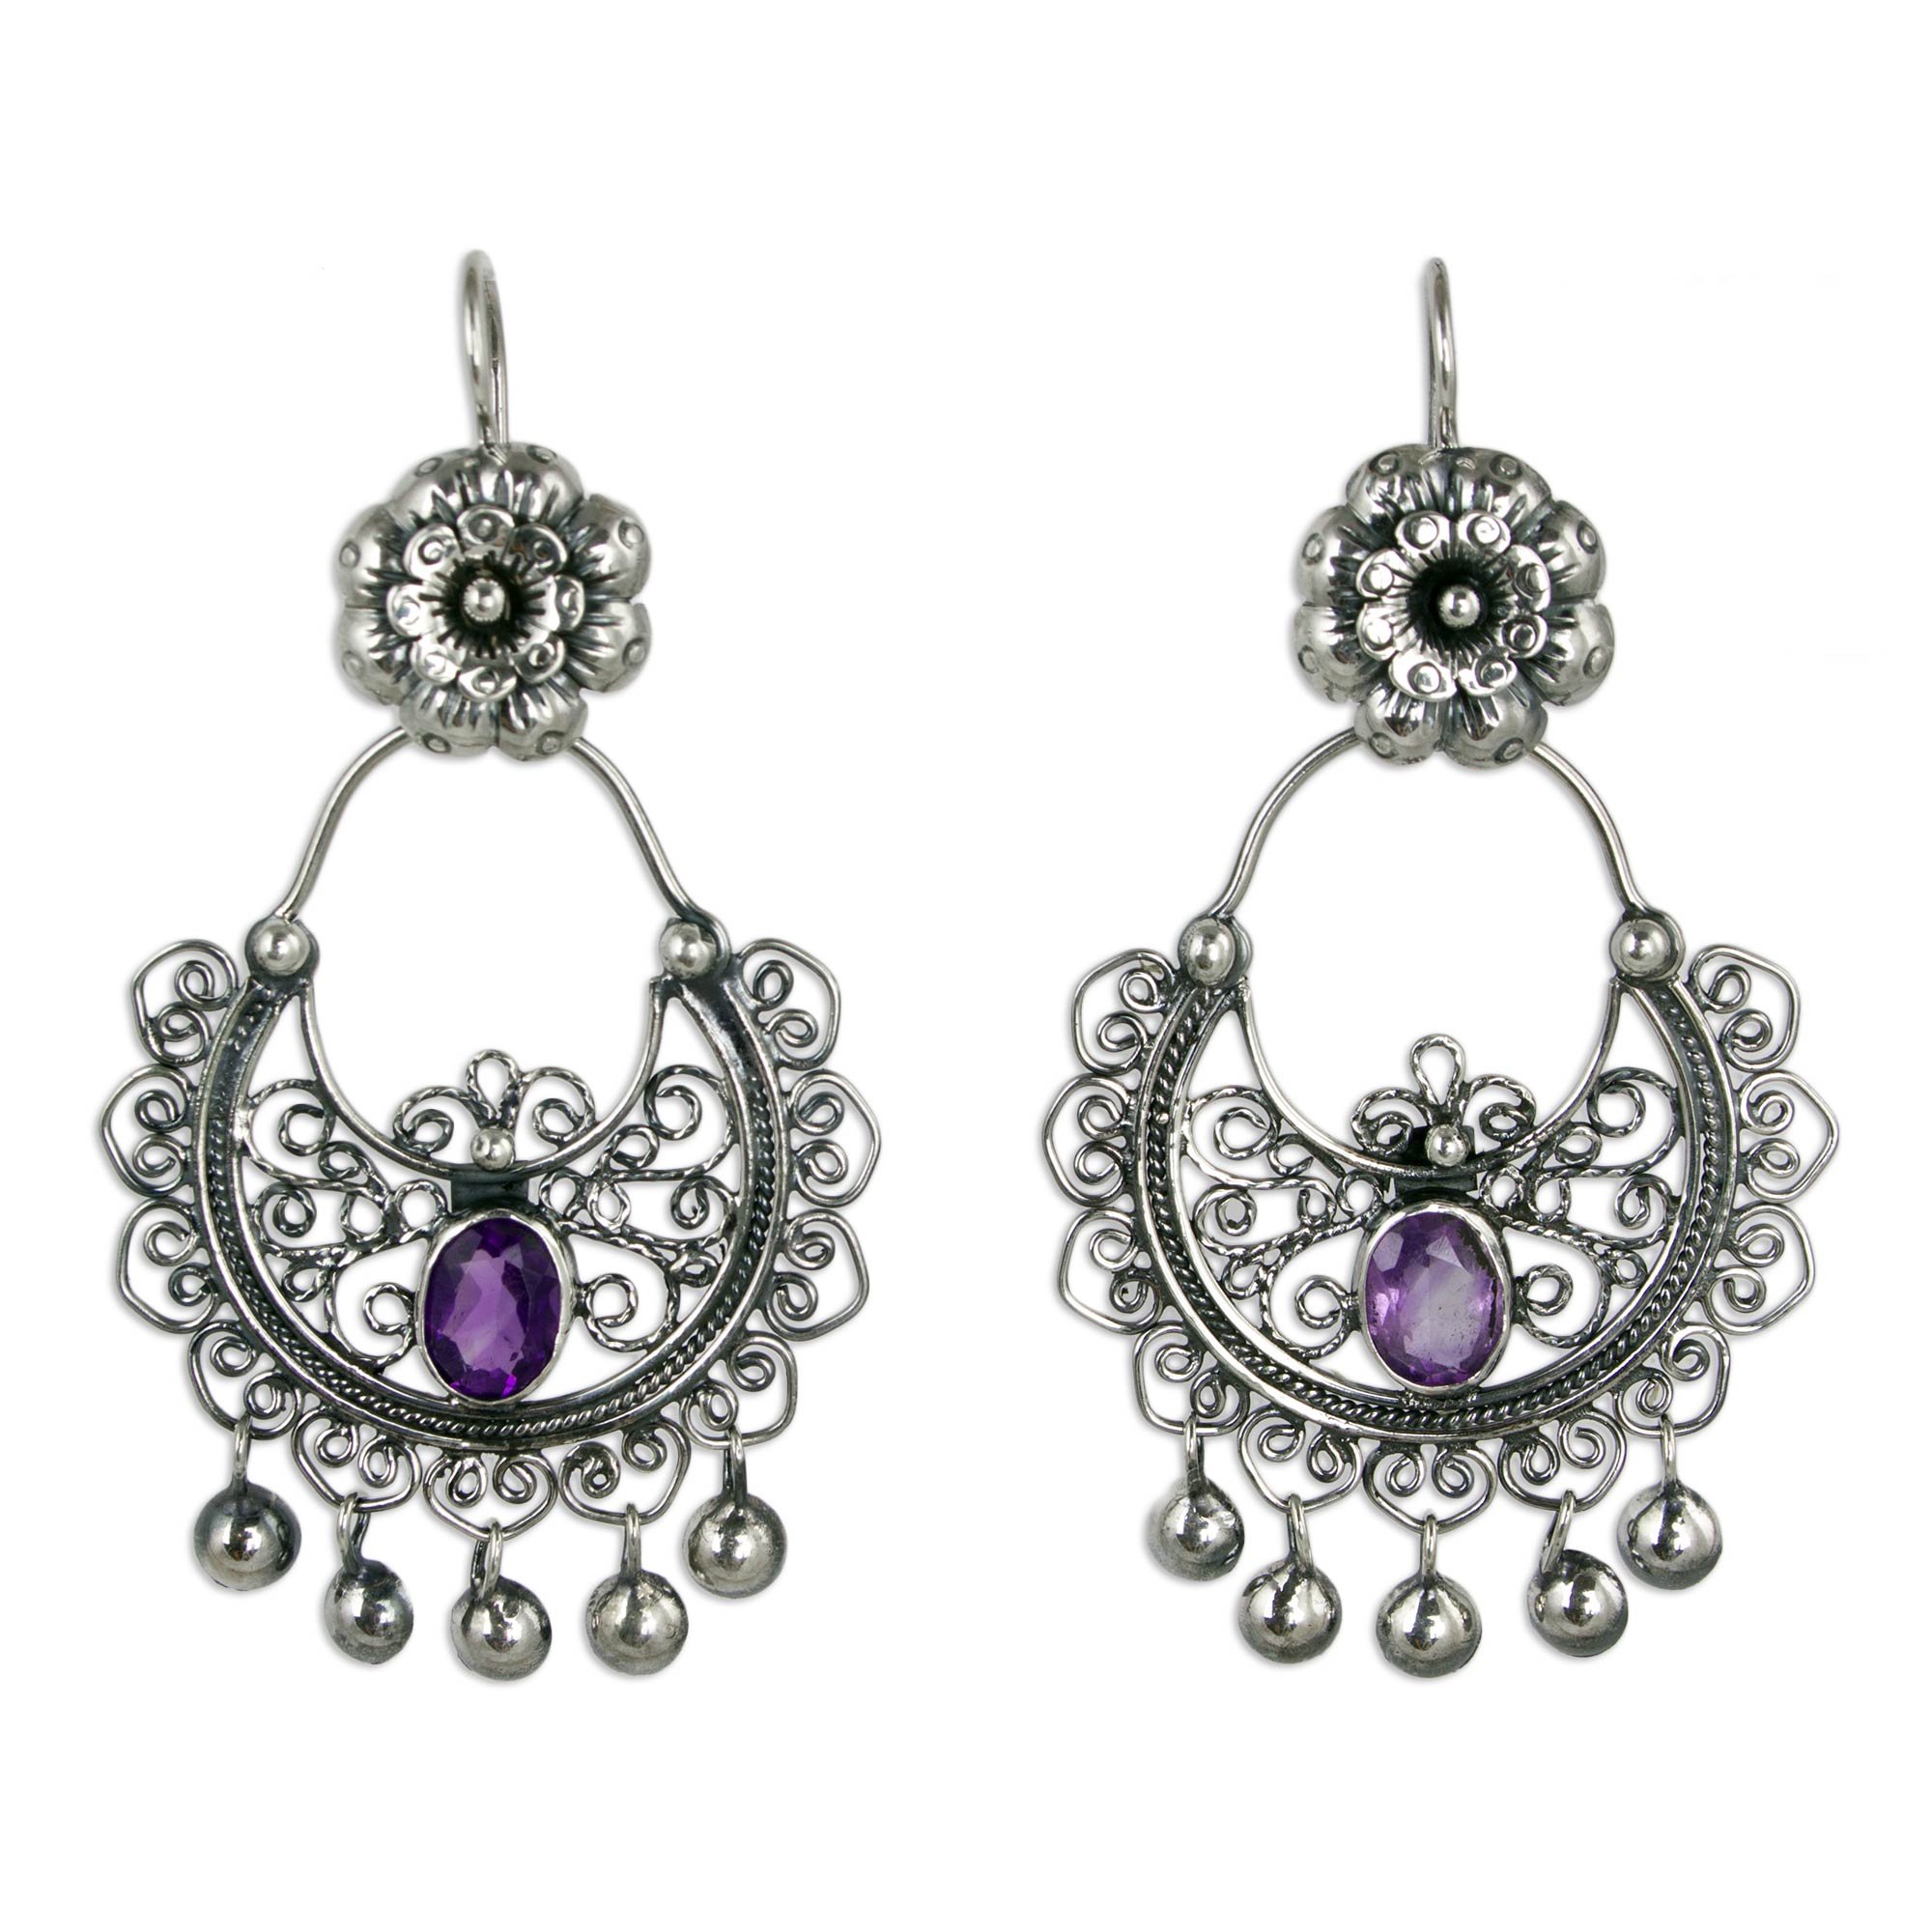 Sterling Silver Mazahua Engagement Earrings with Amethyst - Mazahua ...